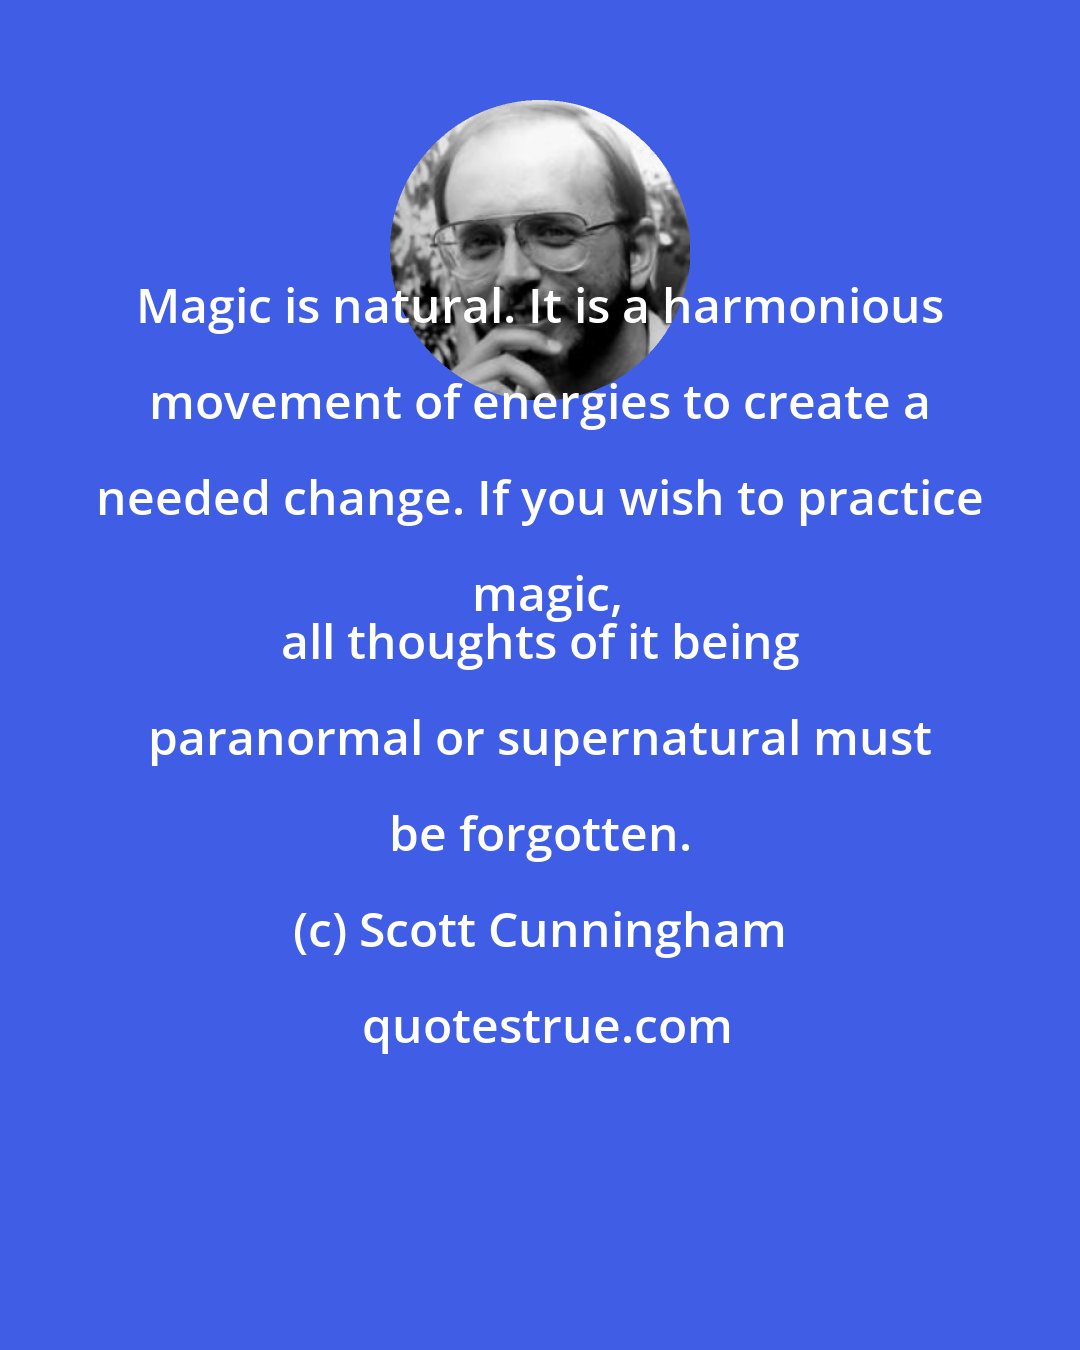 Scott Cunningham: Magic is natural. It is a harmonious movement of energies to create a needed change. If you wish to practice magic,
 all thoughts of it being paranormal or supernatural must be forgotten.